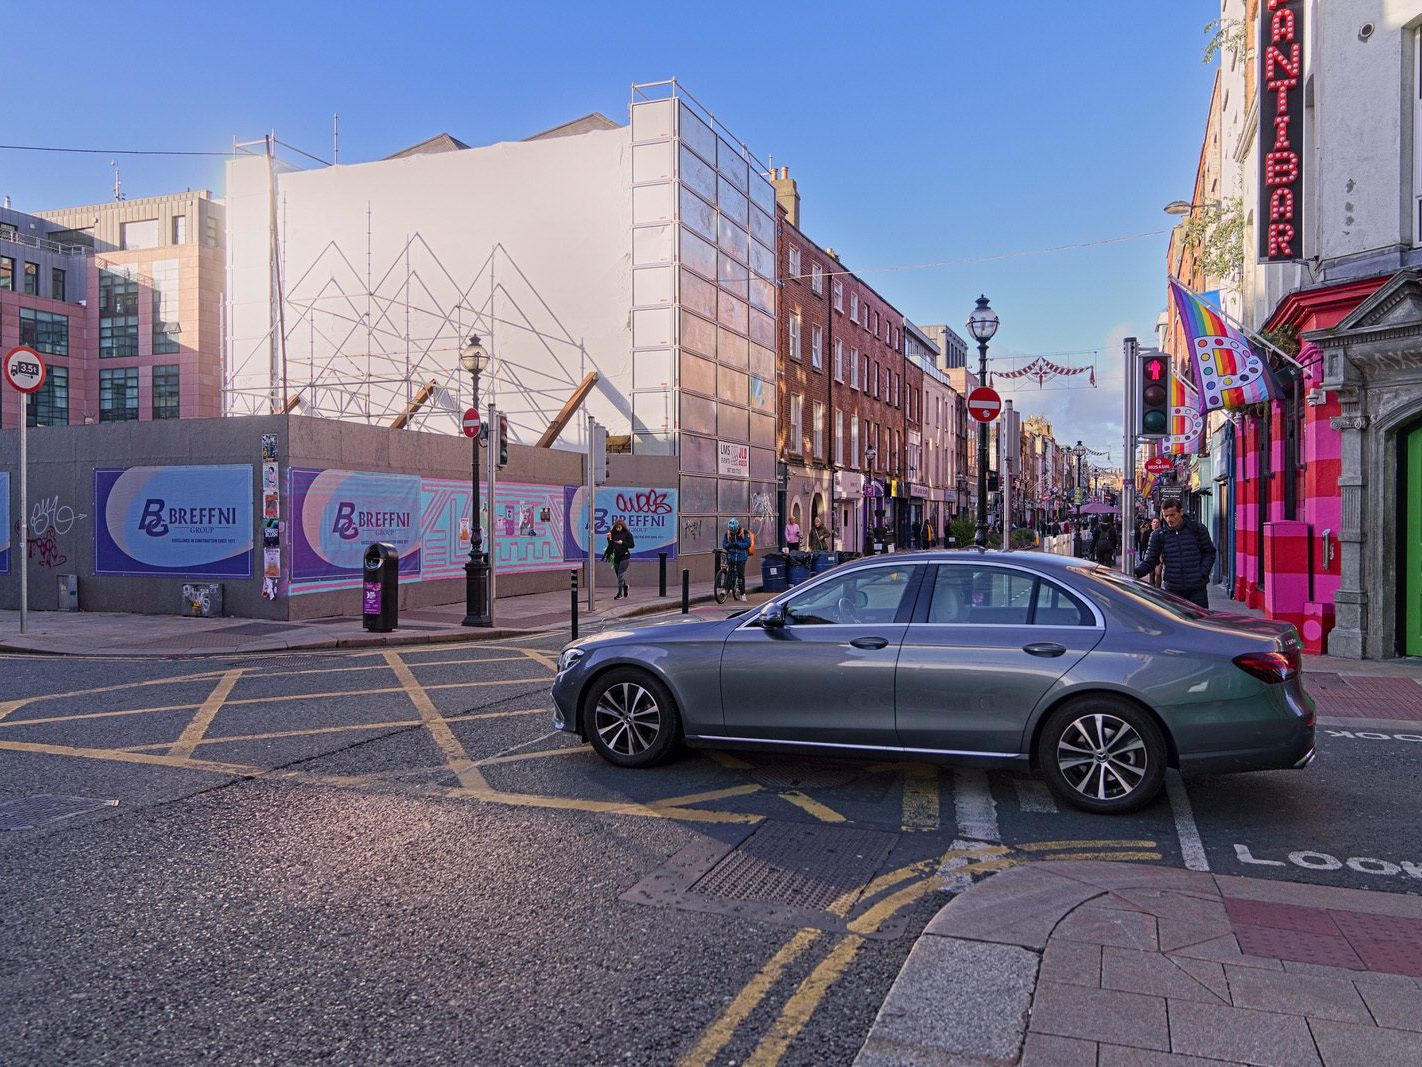 CAPEL STREET IS STILL A W.I.P. [THE PERIOD BETWEEN HALLOWEEN AND CHRISTMAS]-224804-1